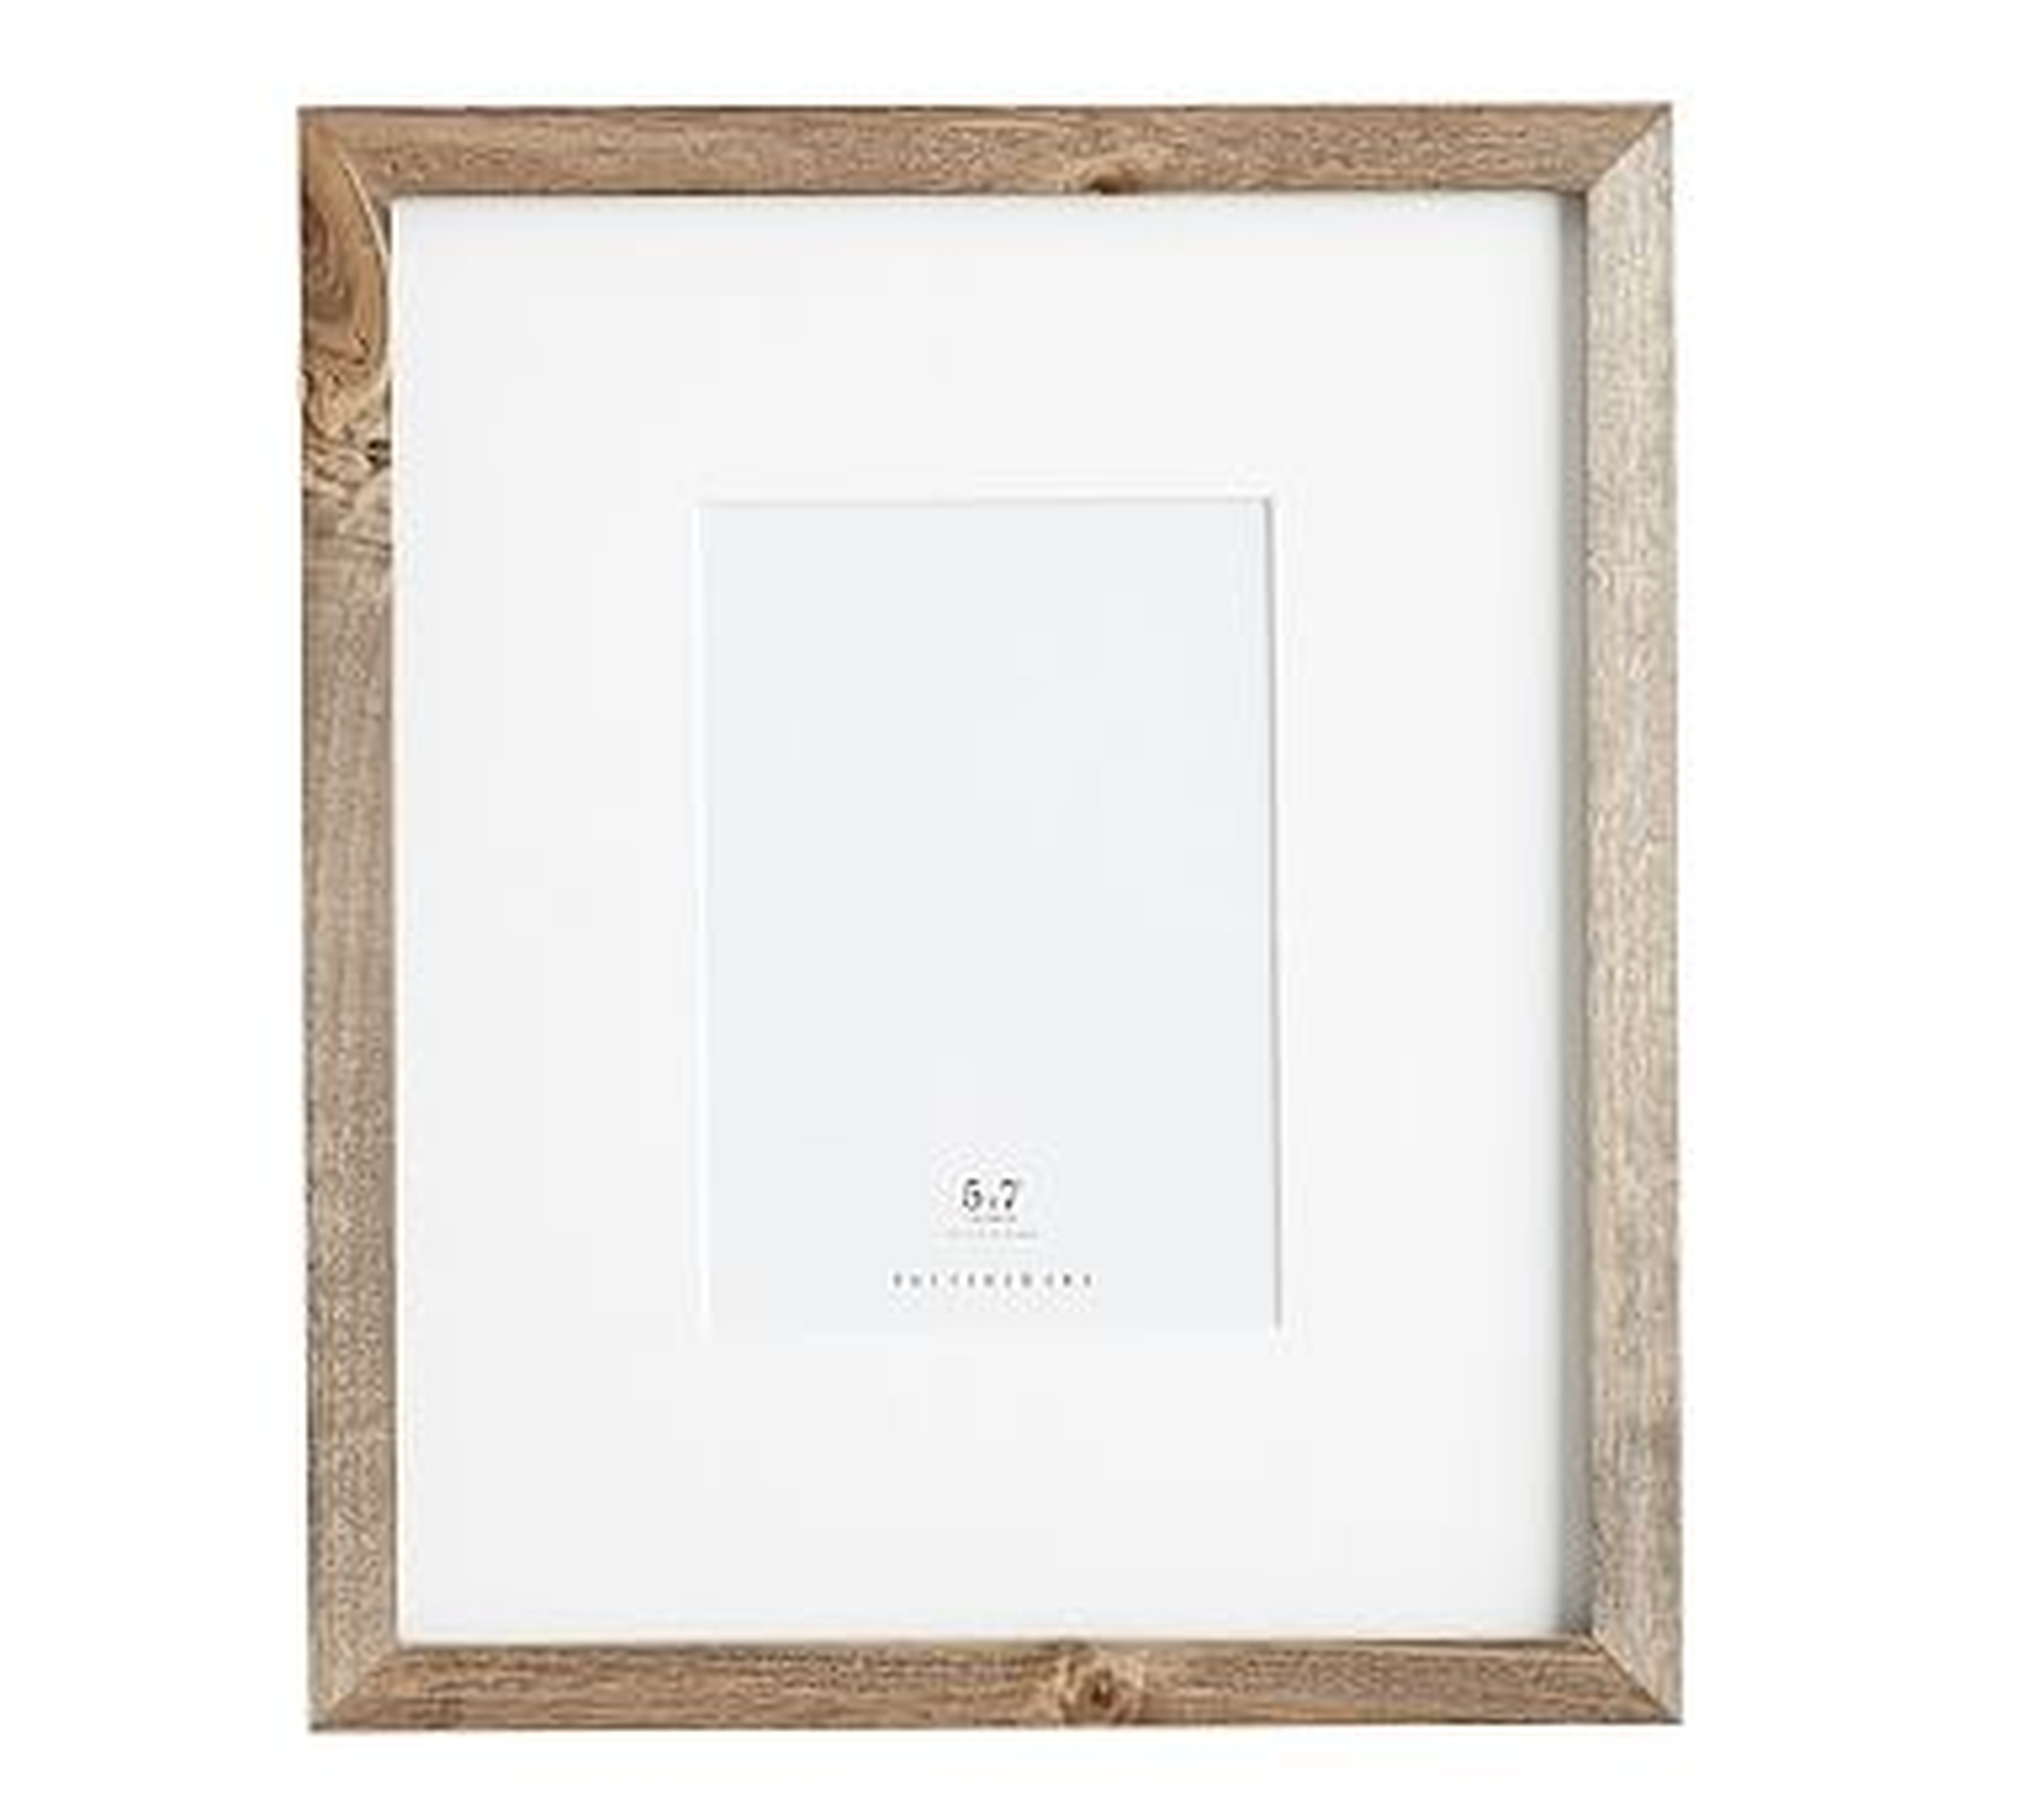 Wood Gallery Single Opening Frame. Matted 5"x7", Gray - Pottery Barn